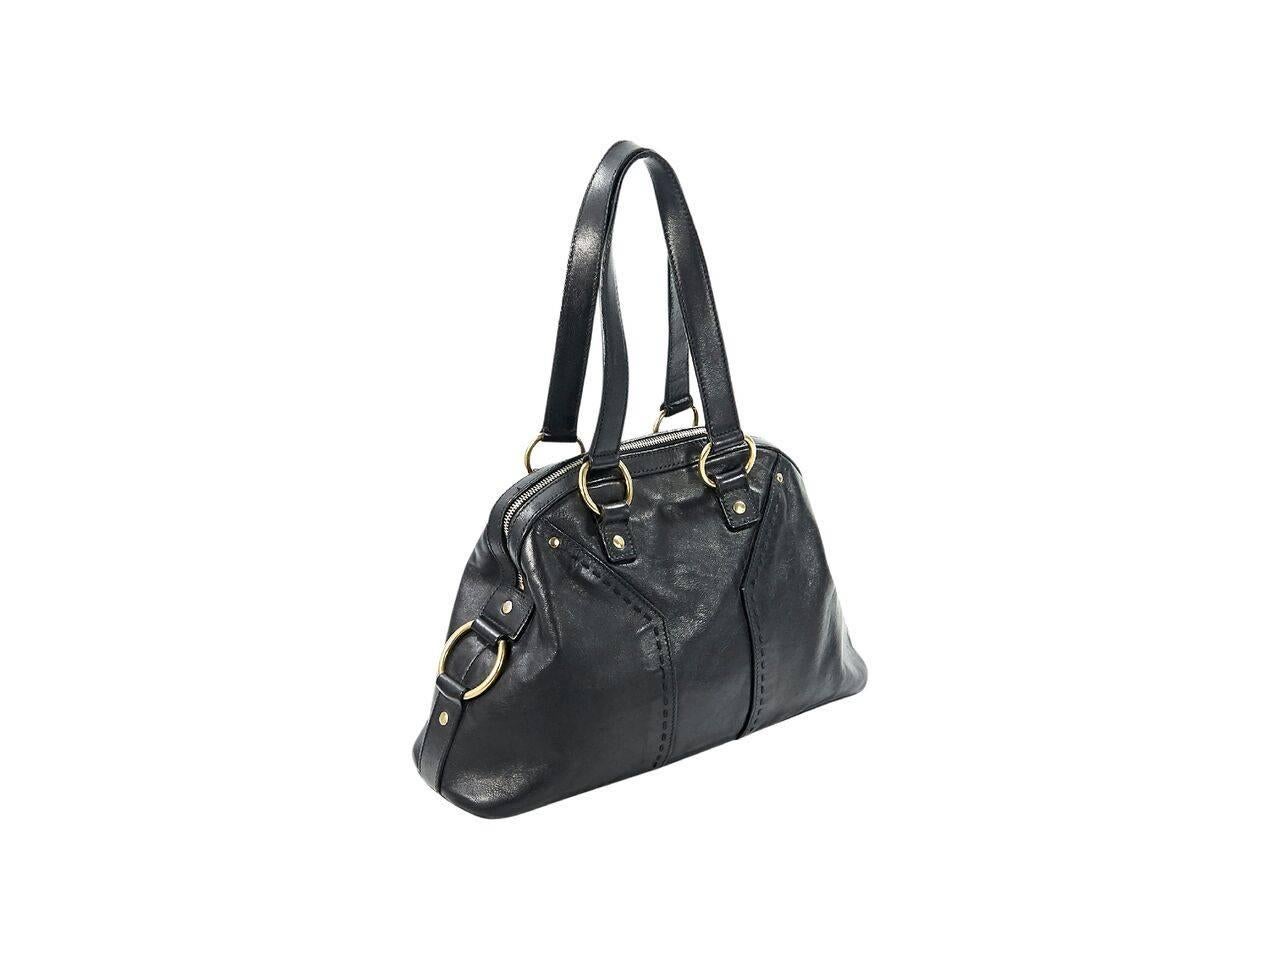 Product details:  Black leather Muse tote bag by Yves Saint Laurent.  Dual shoulder straps.  Top zip closure.  Lined interior with inner zip and slide pockets.  Protective metal feet.  Goldtone hardware.  13.25